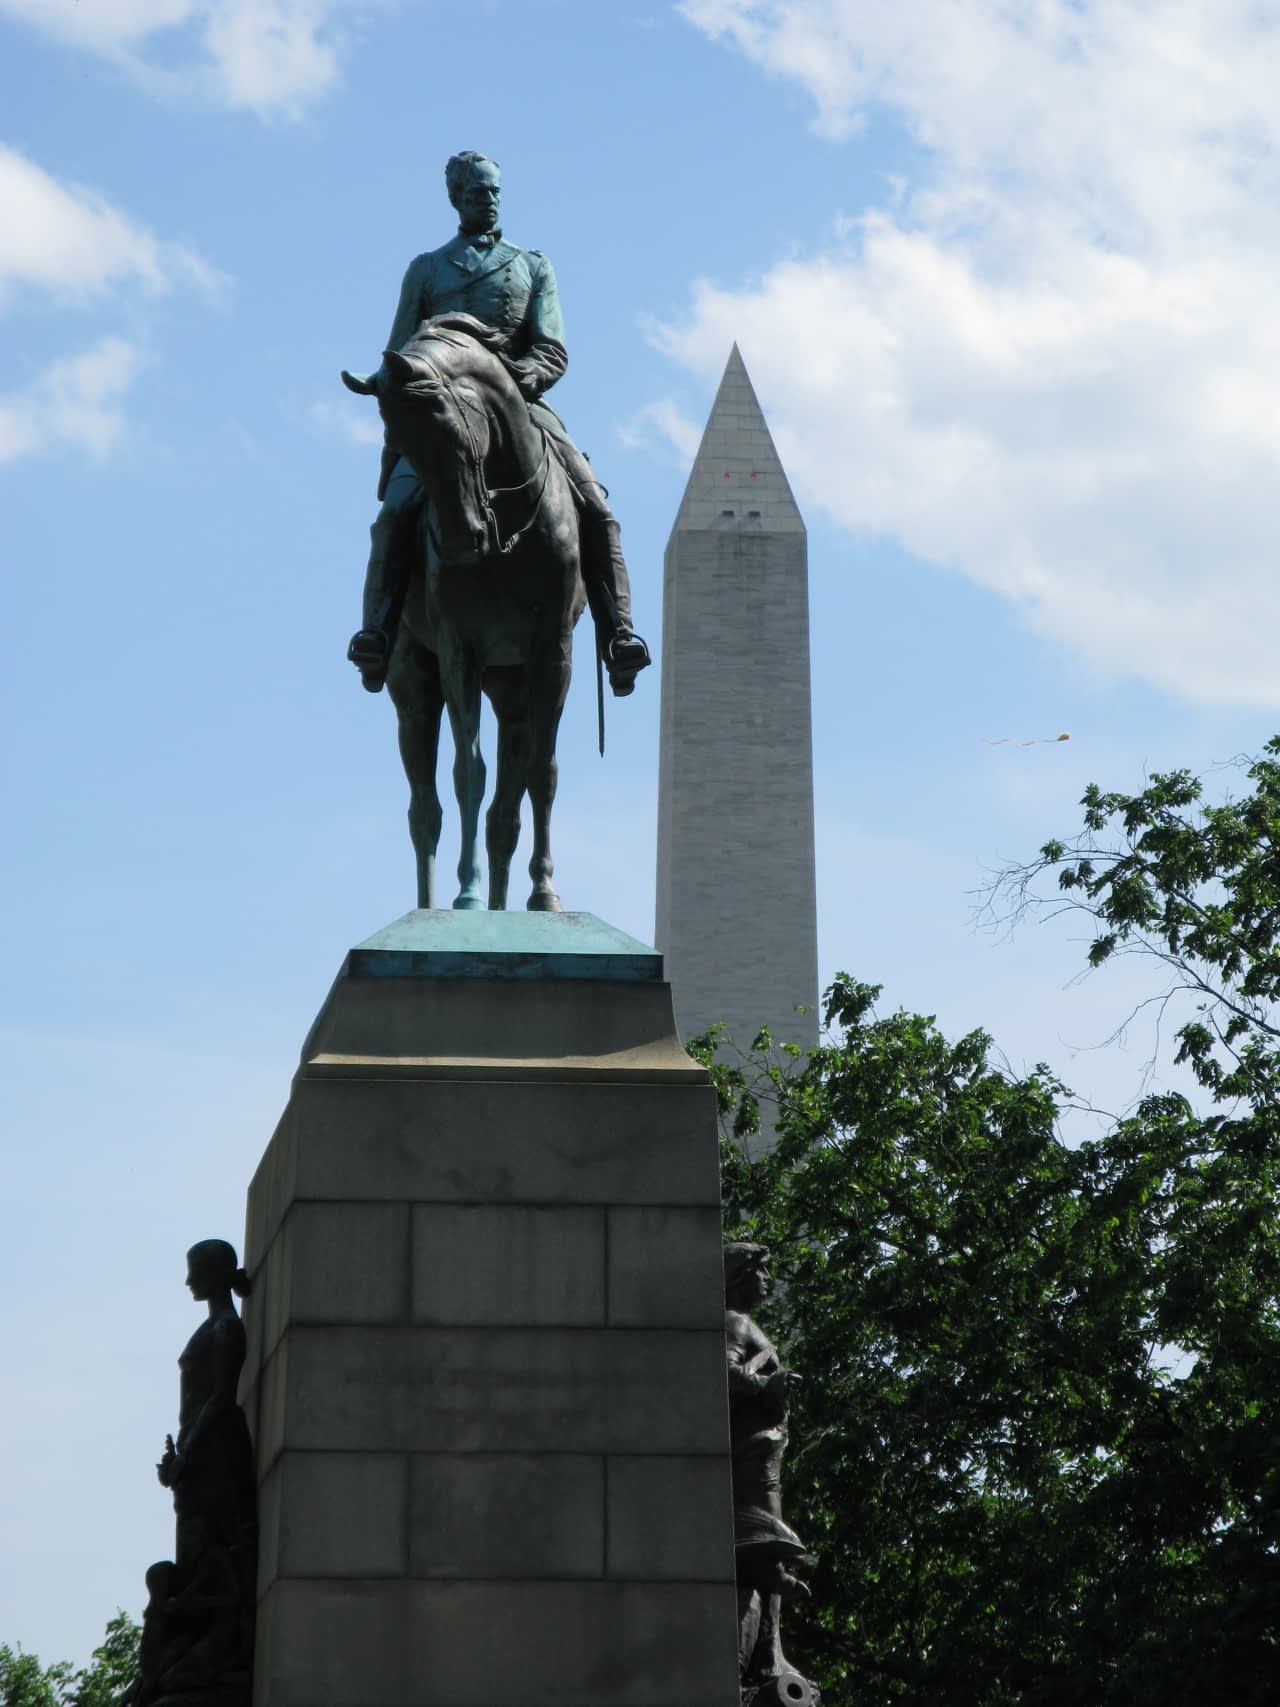 Some monument in front of the Washington Monument